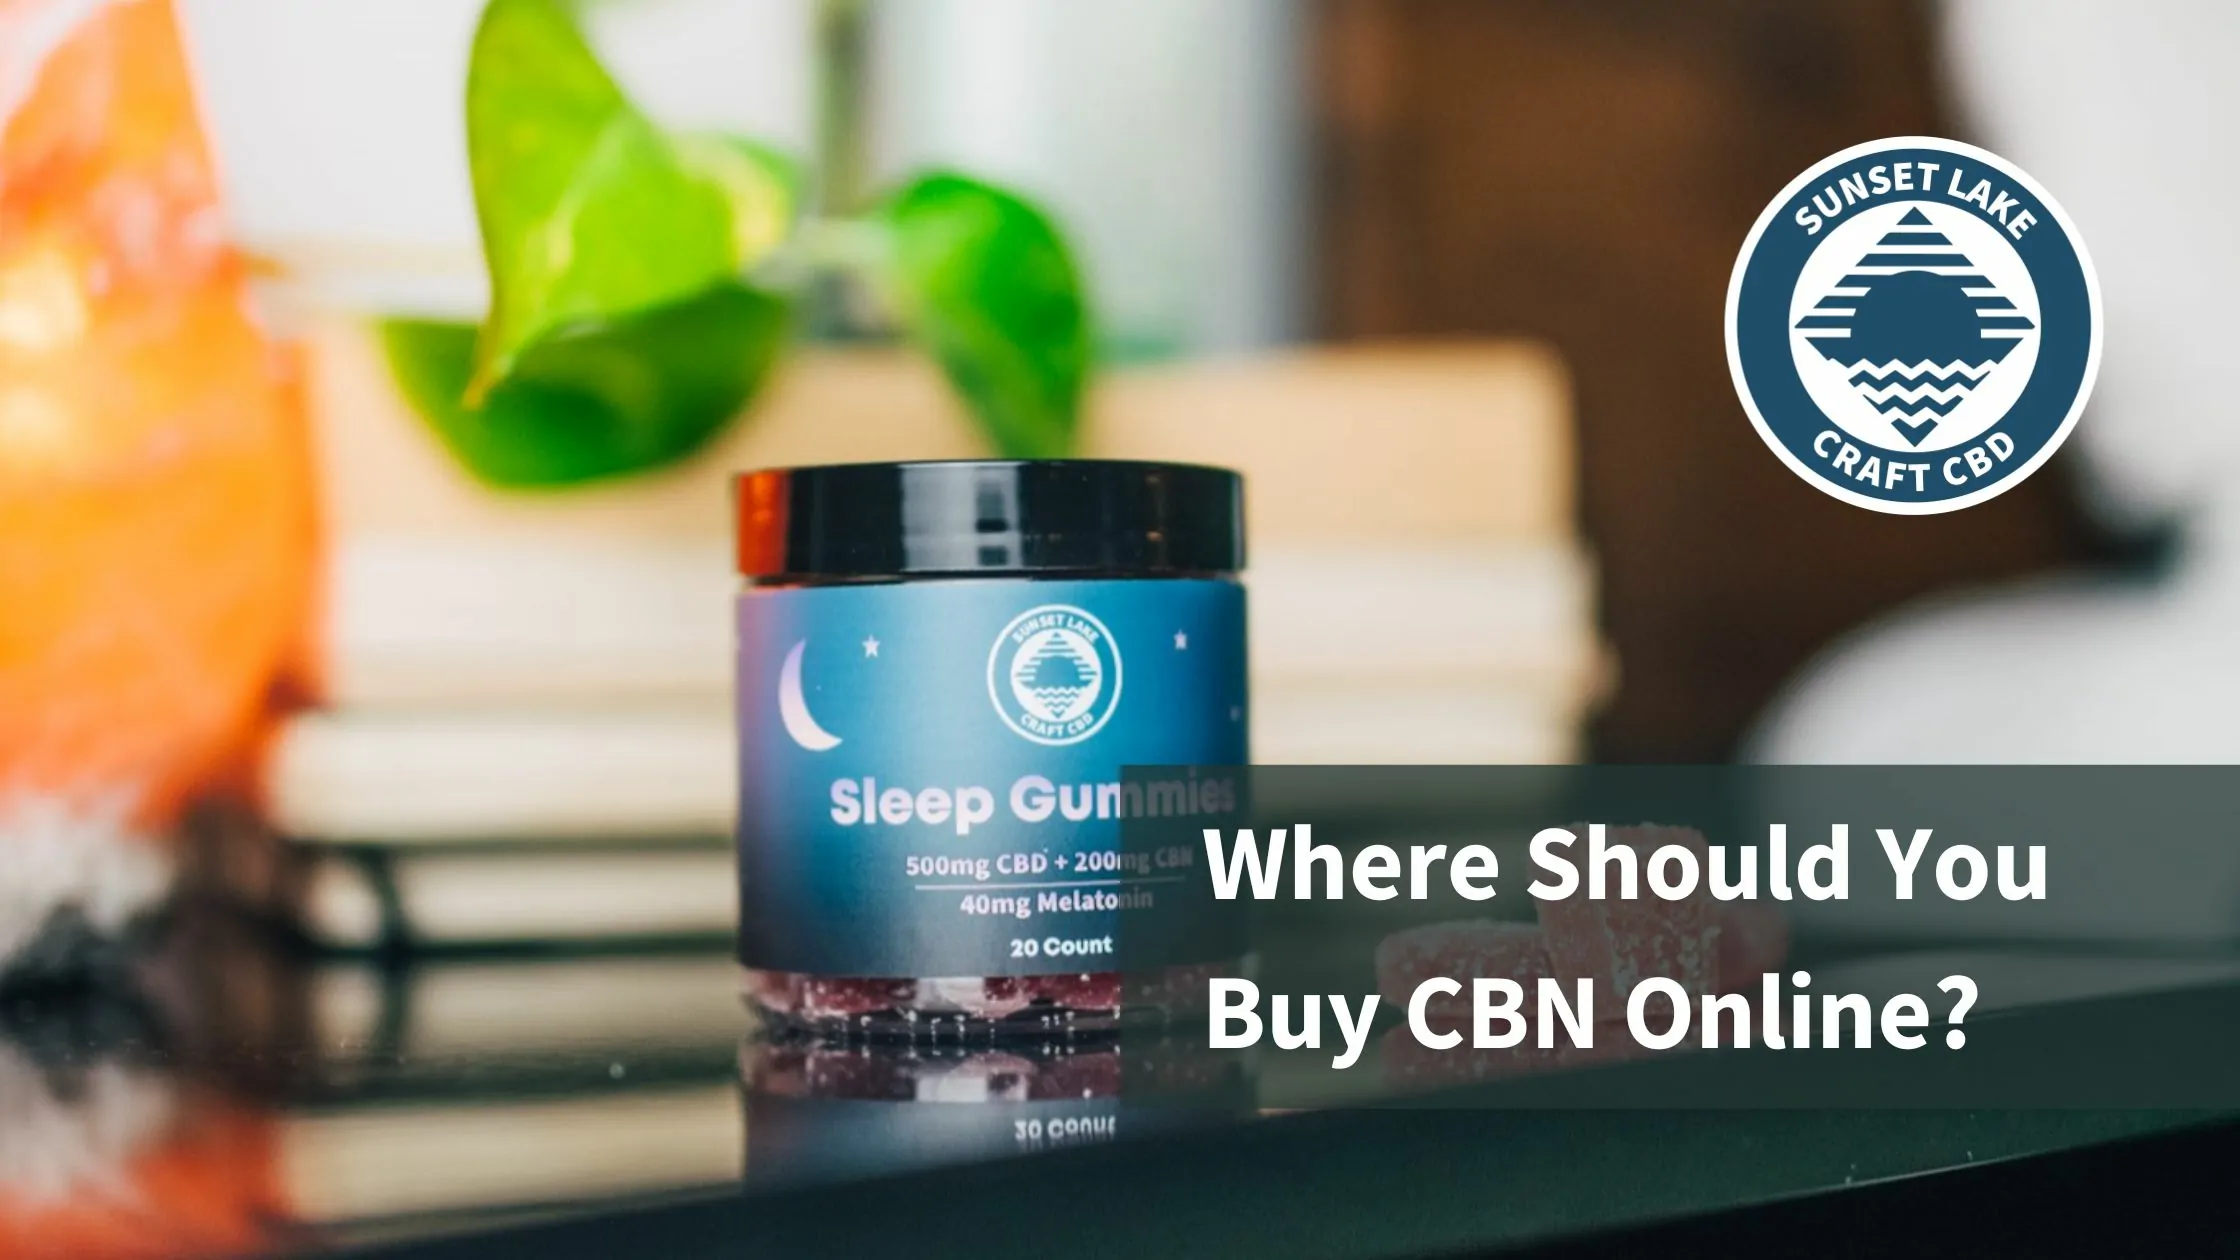 A jar of CBN gummies on a nightstand. Text says "Where to buy cbn online?"